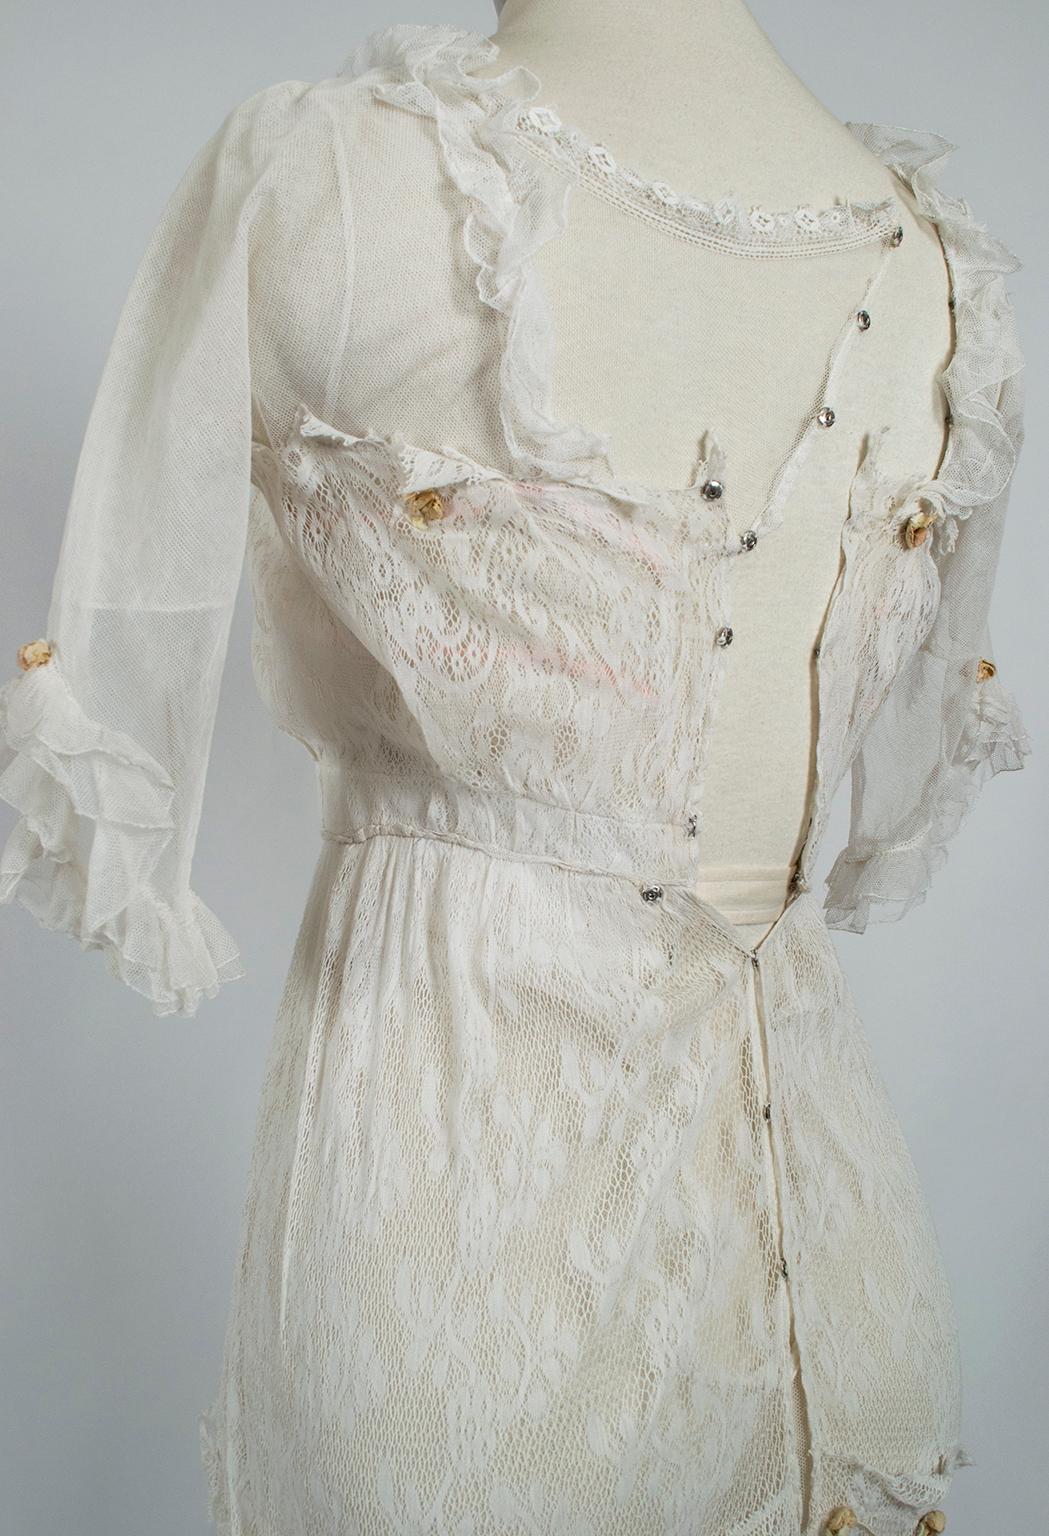 Women's White Edwardian Net Rosebud Afternoon Tea or Bridal Gown - XXS, Early 1900s For Sale